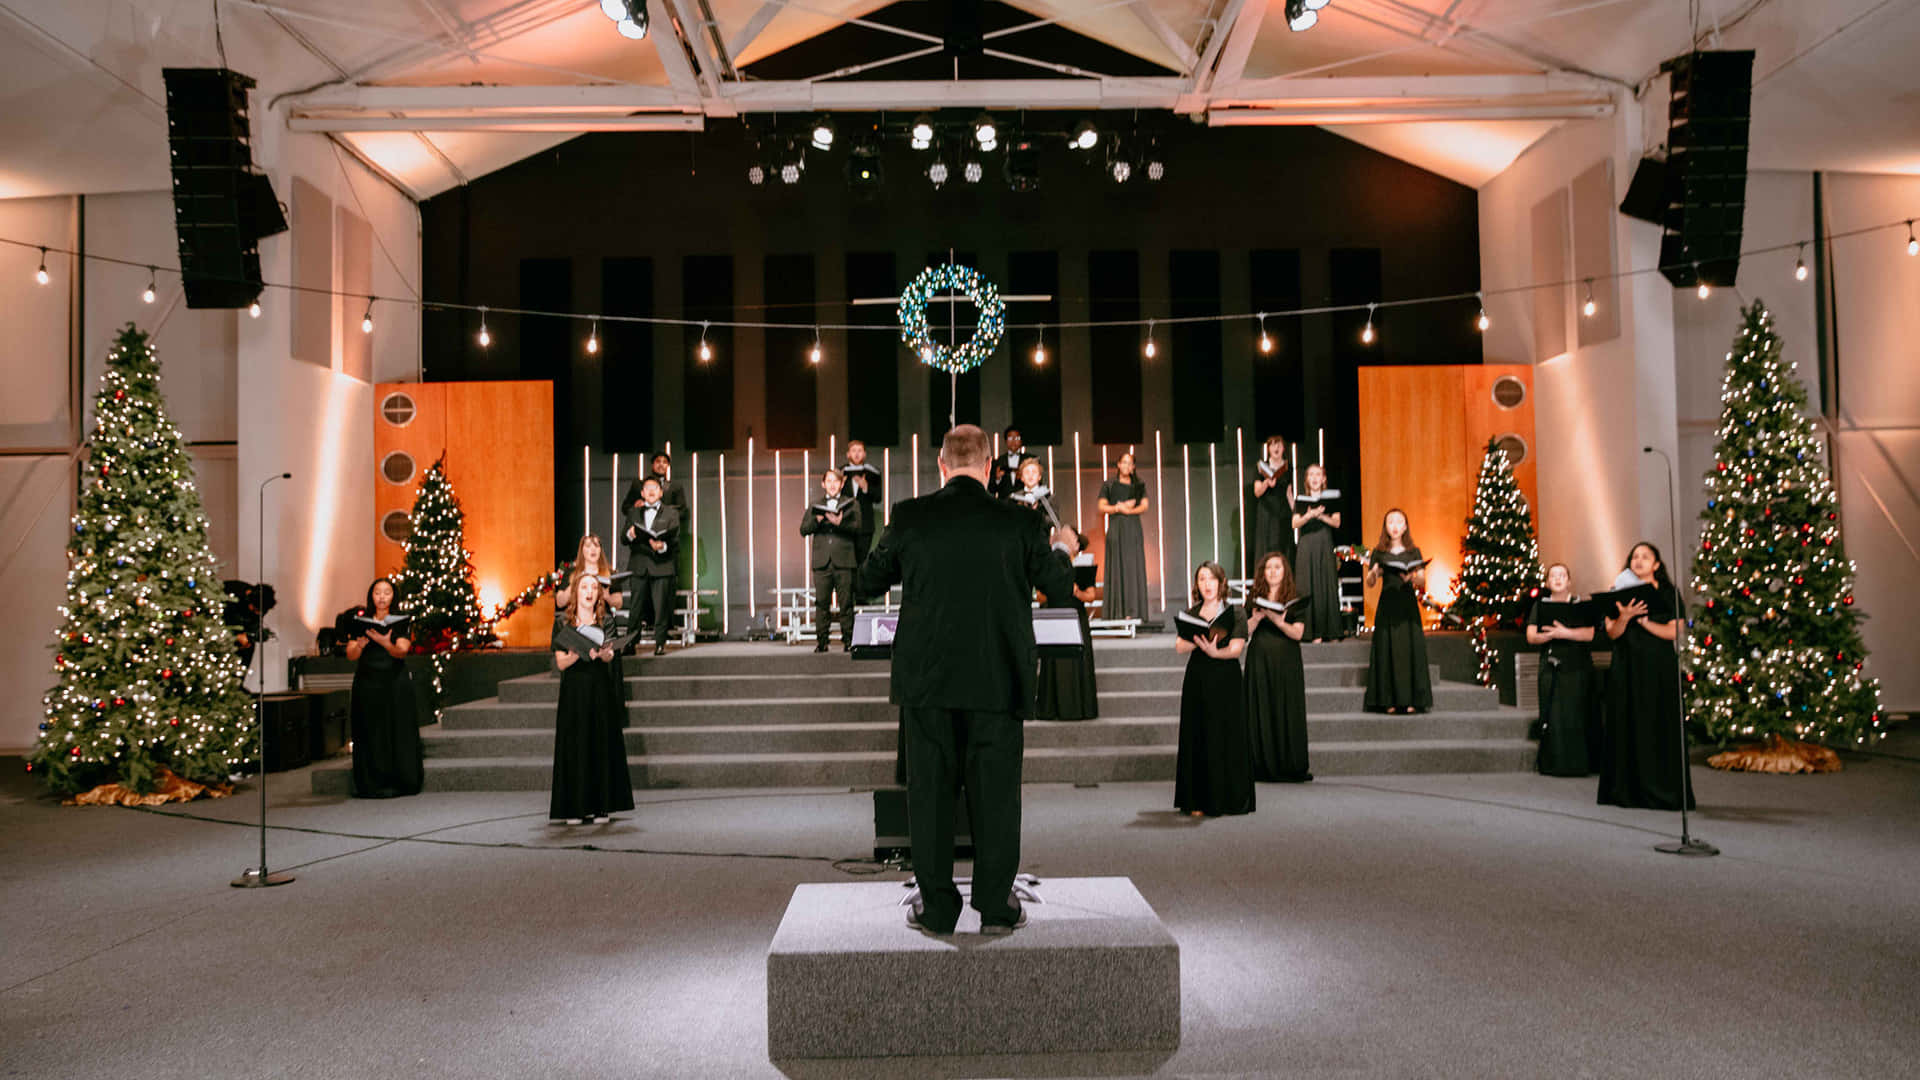 A Choir Performs In A Church With Christmas Trees